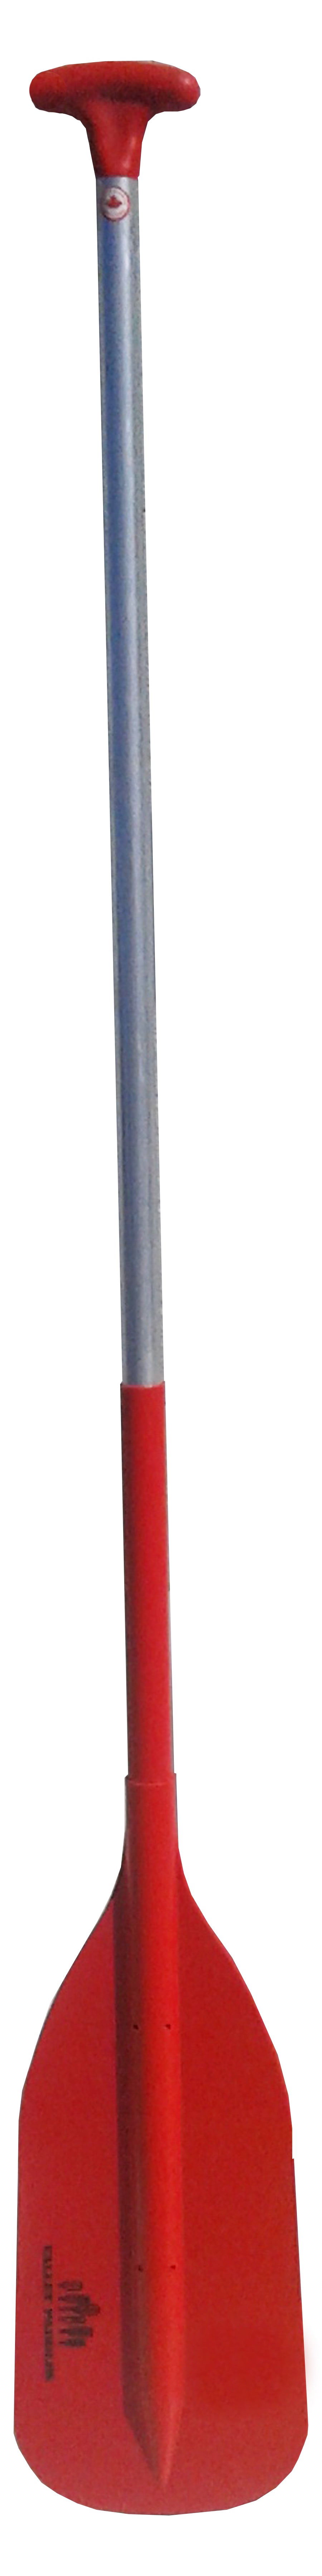 Standard Canoe Paddle in red